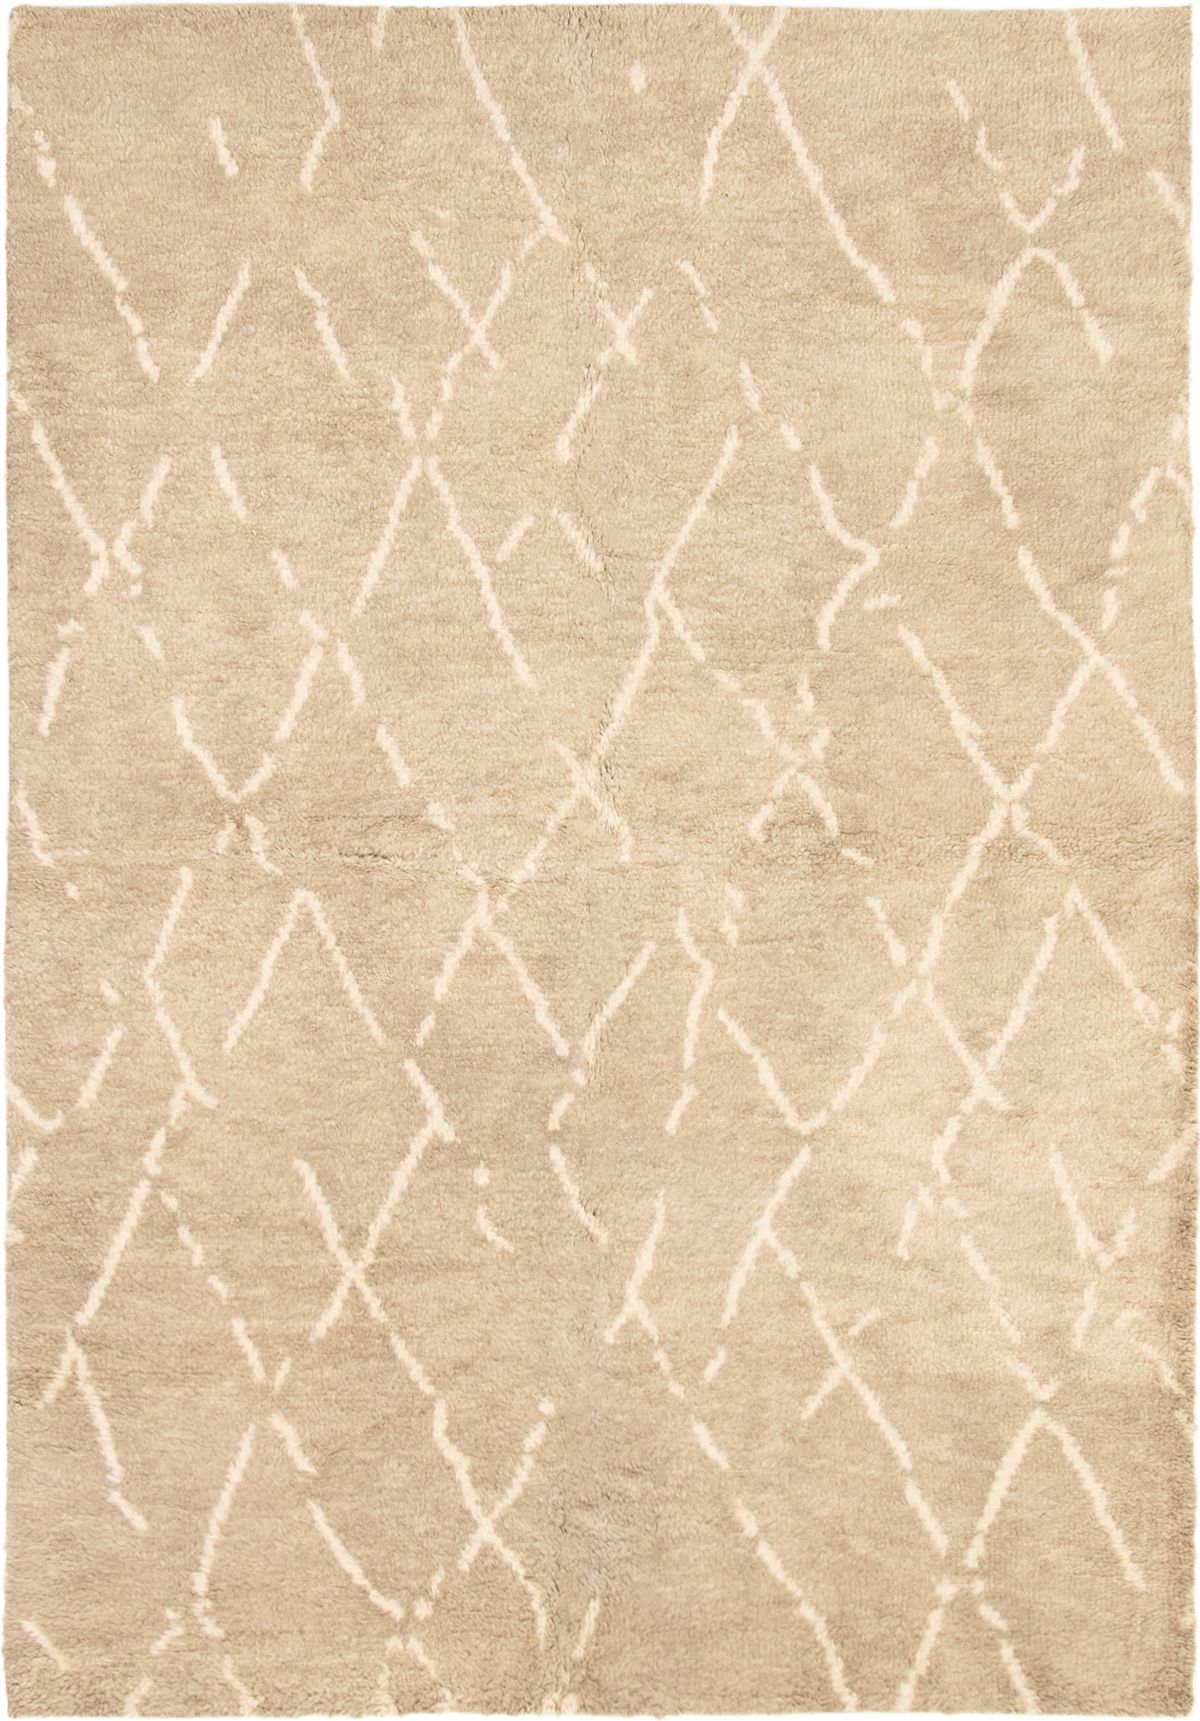 Hand-knotted Arlequin Khaki Wool Rug 6'3" x 9'0" Size: 6'3" x 9'0"  